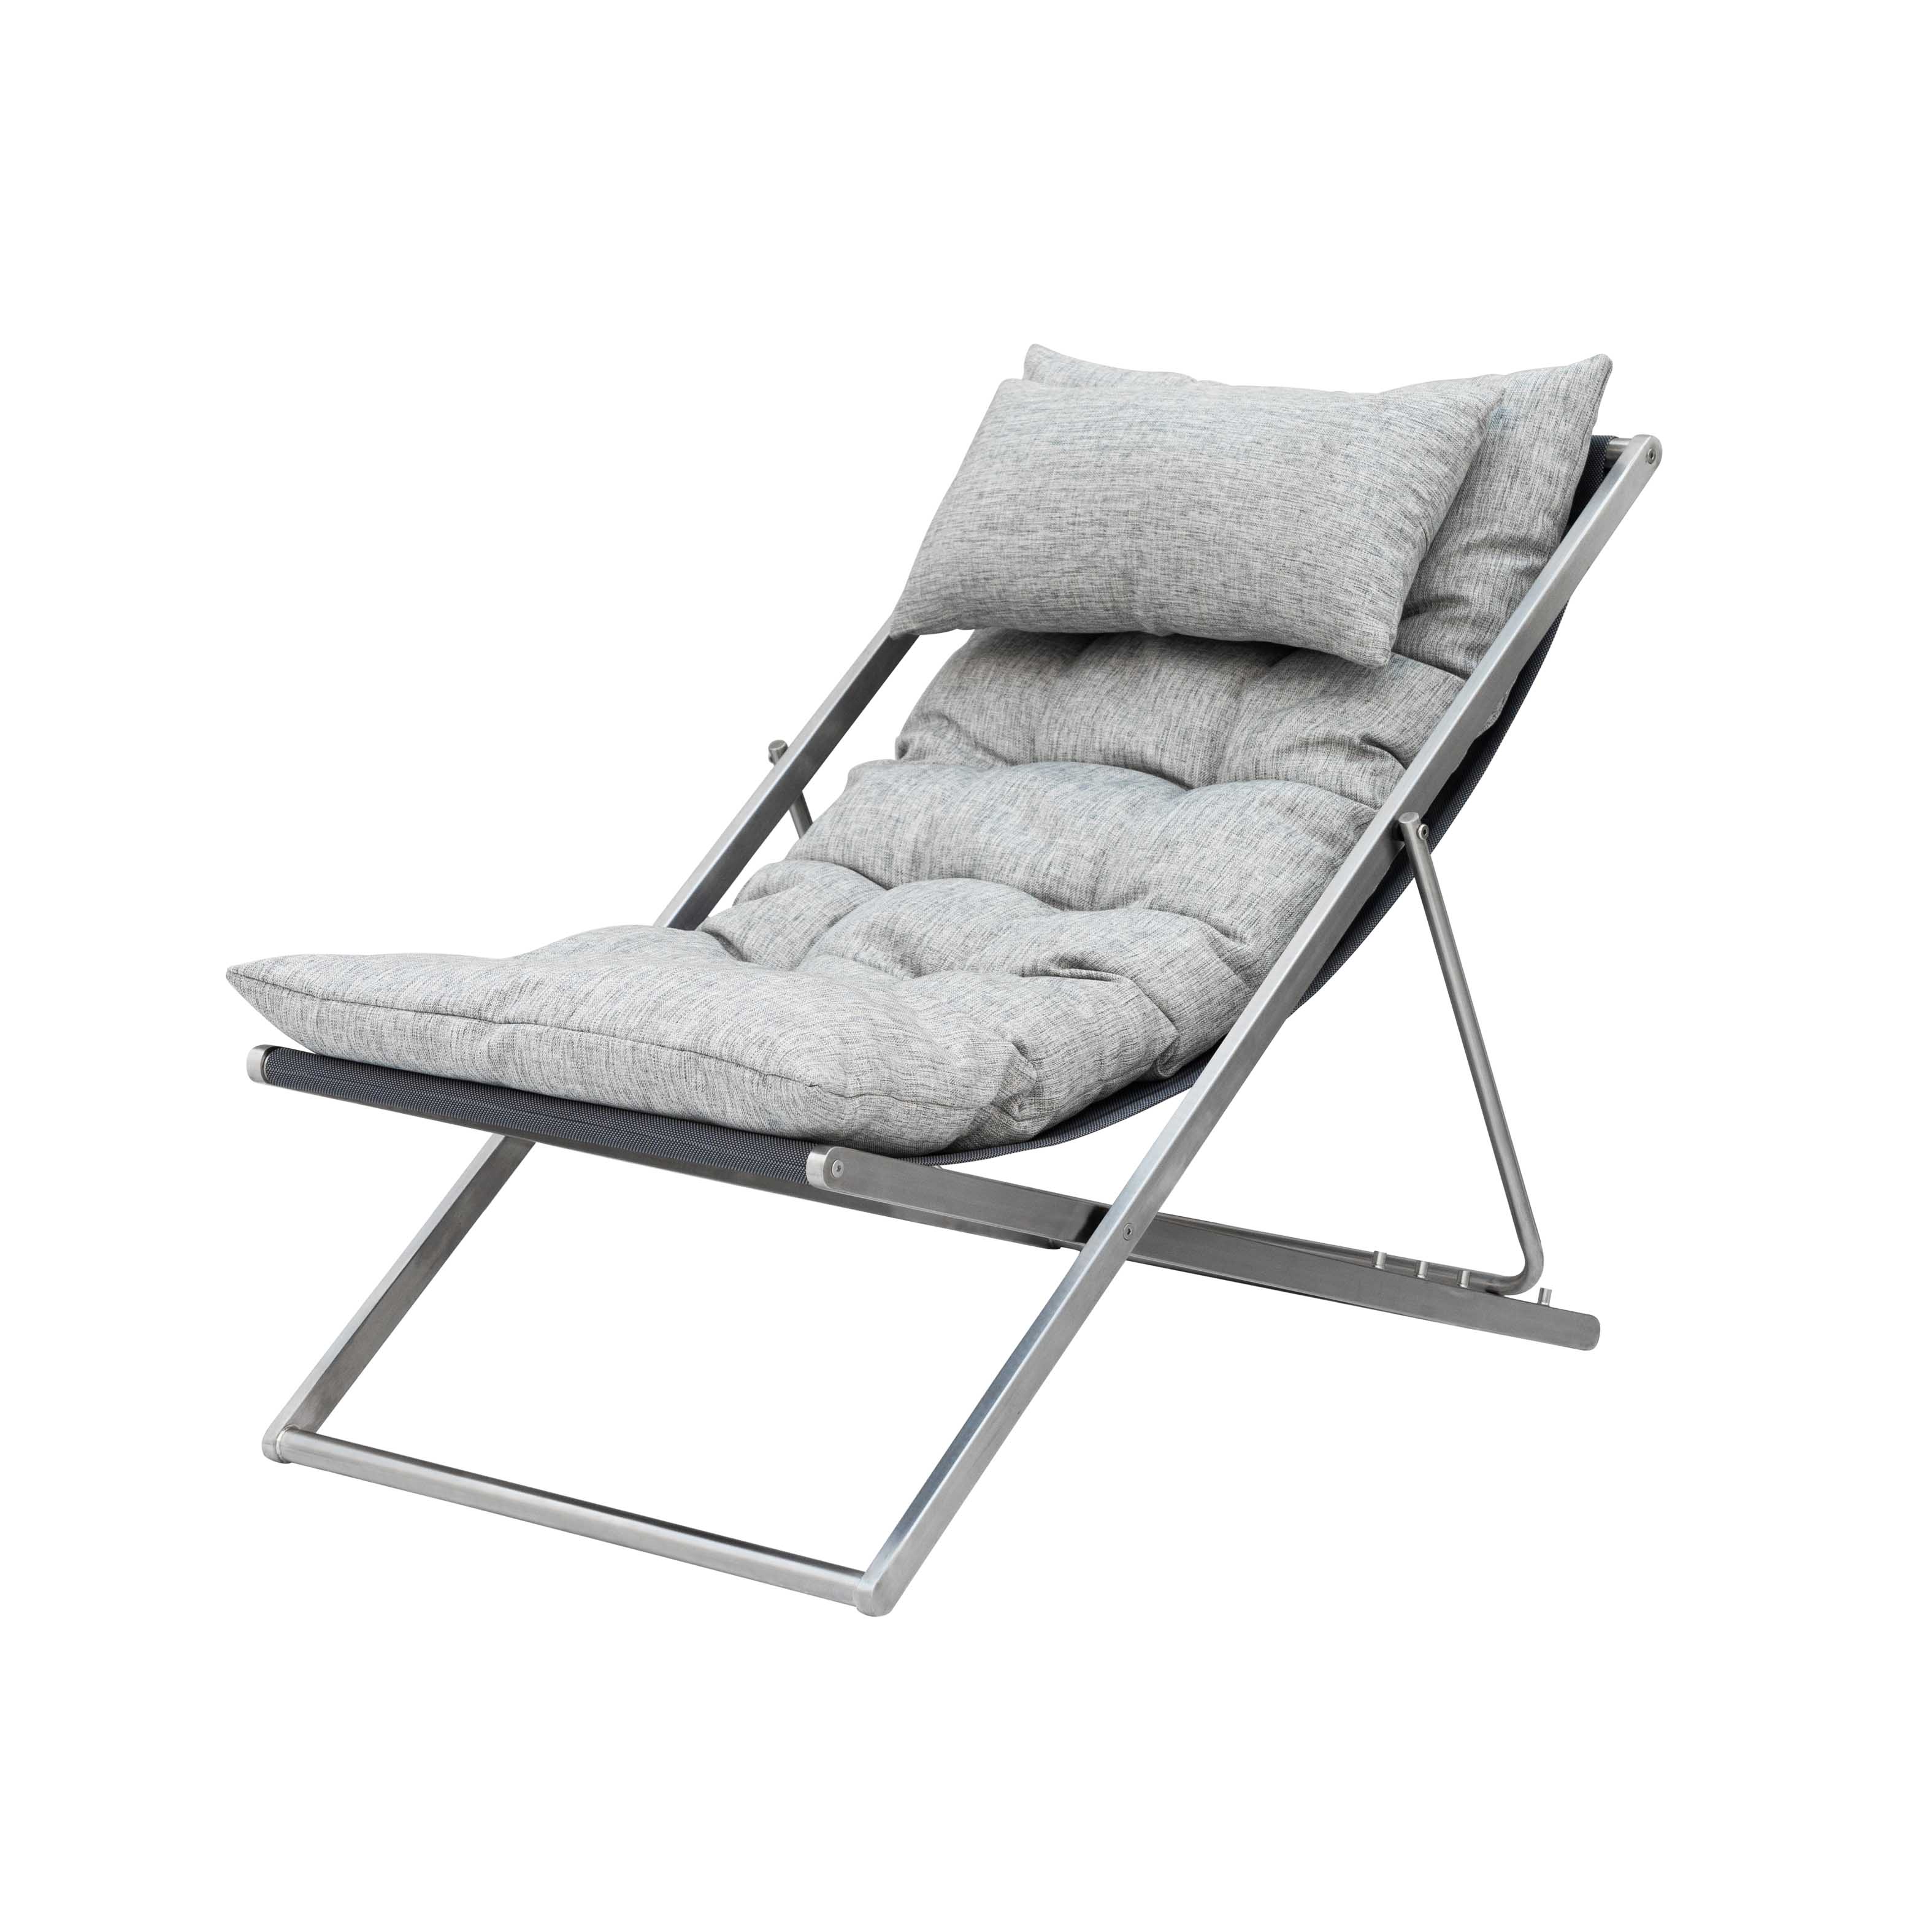 Naples relax chair S1